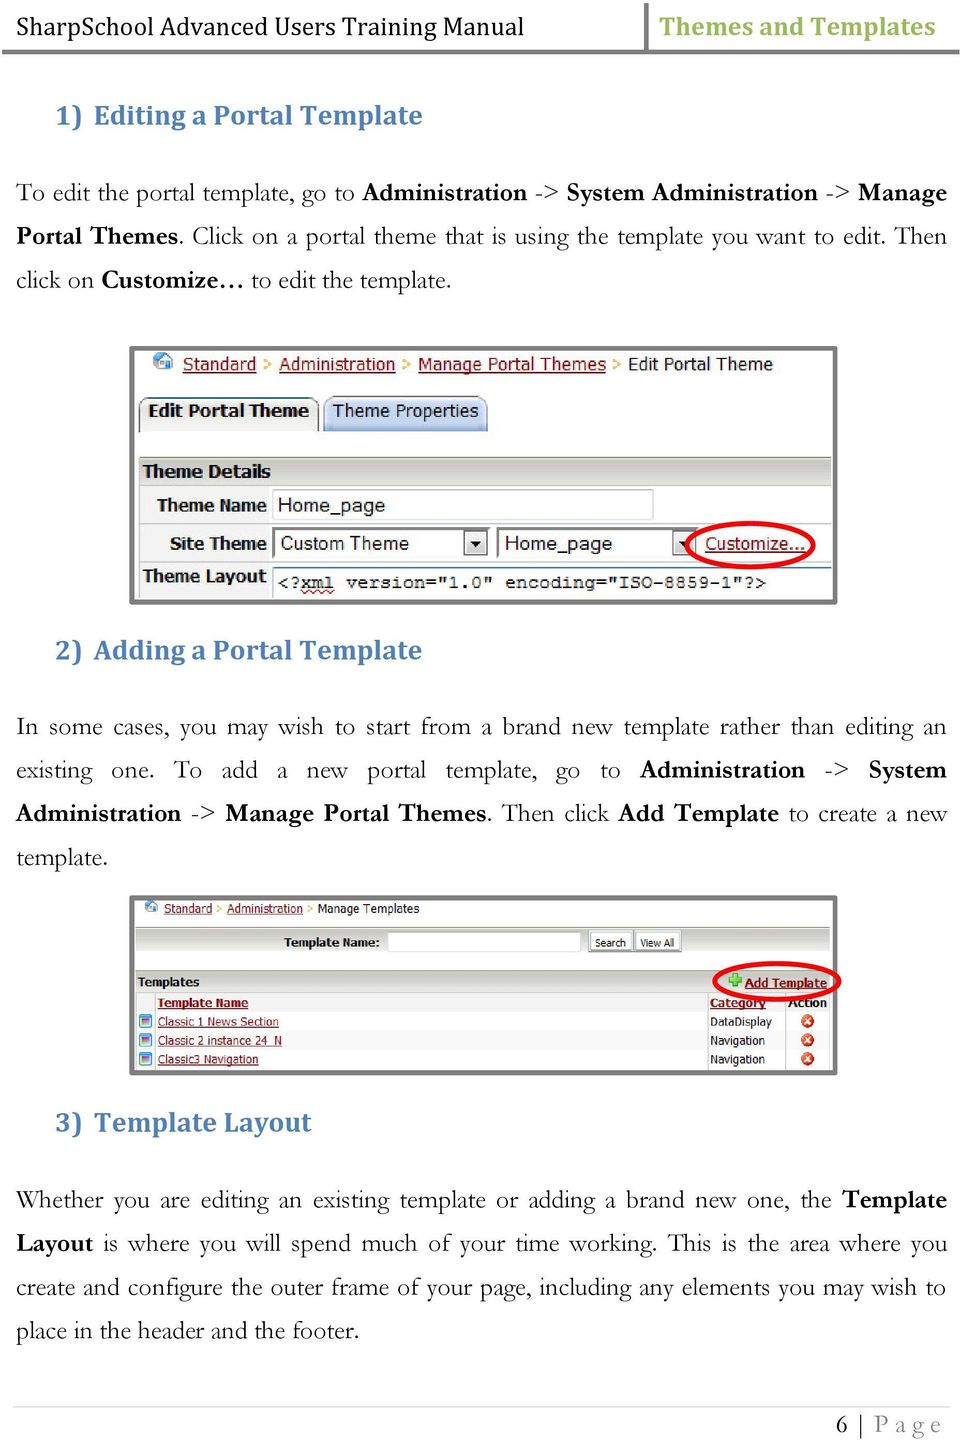 To add a new portal template, go to Administration -> System Administration -> Manage Portal Themes. Then click Add Template to create a new template.